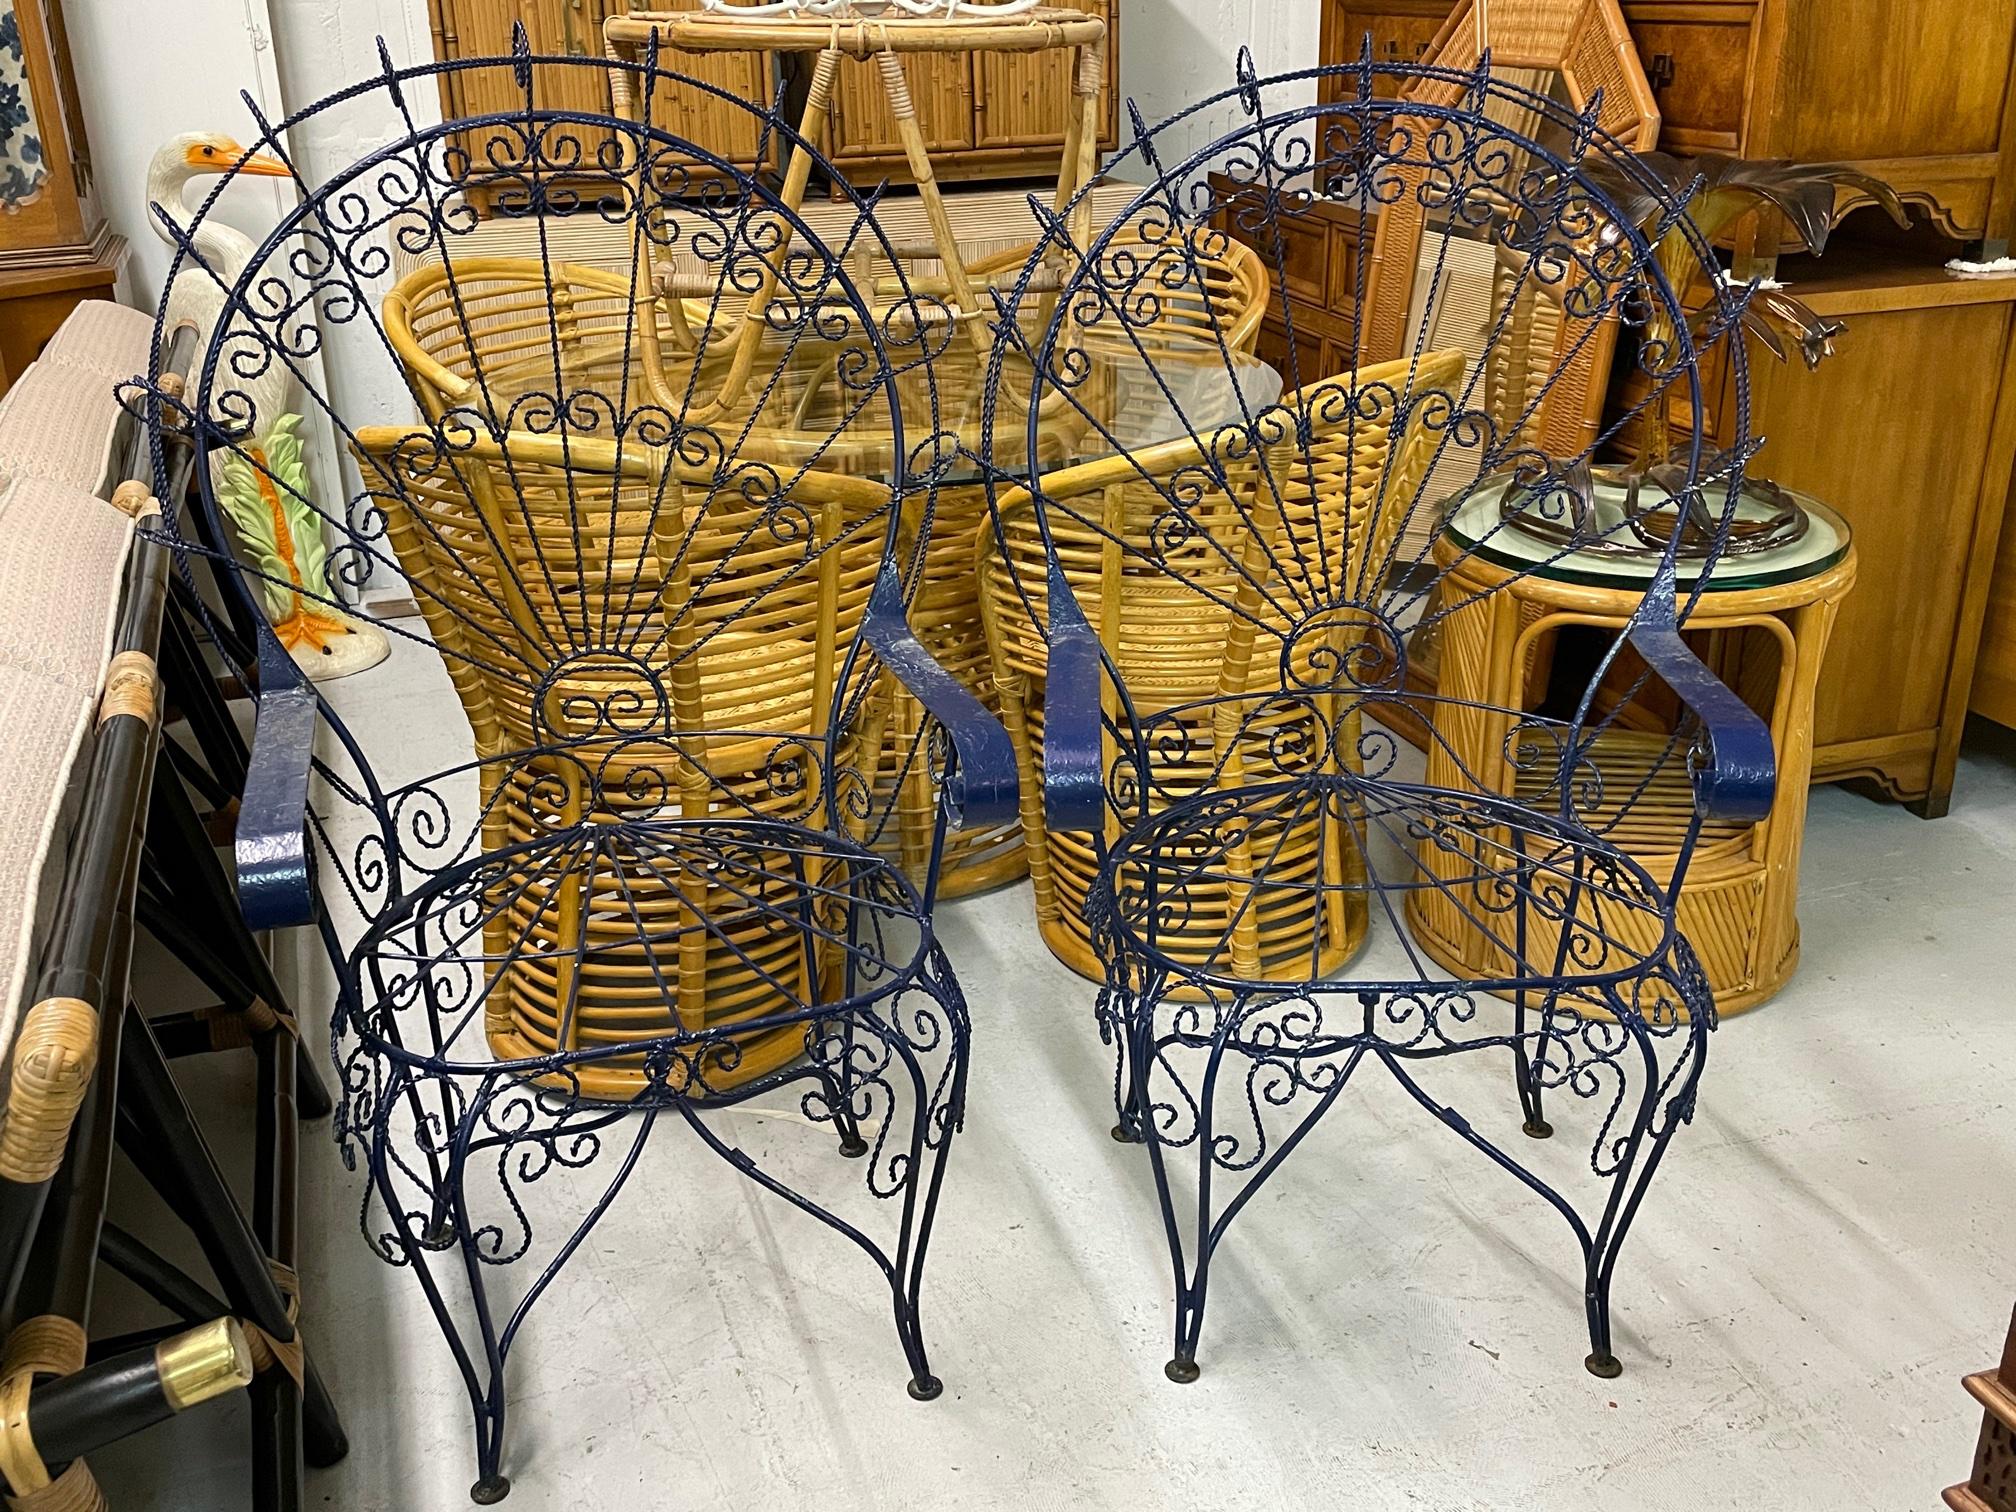 Set of two wrought iron peacock garden chairs by Salterini feature large fan backs and a twisted wire frame. Decorative scroll detailing in this Victorian style chair. Good condition with imperfections consistent with age, including some paint